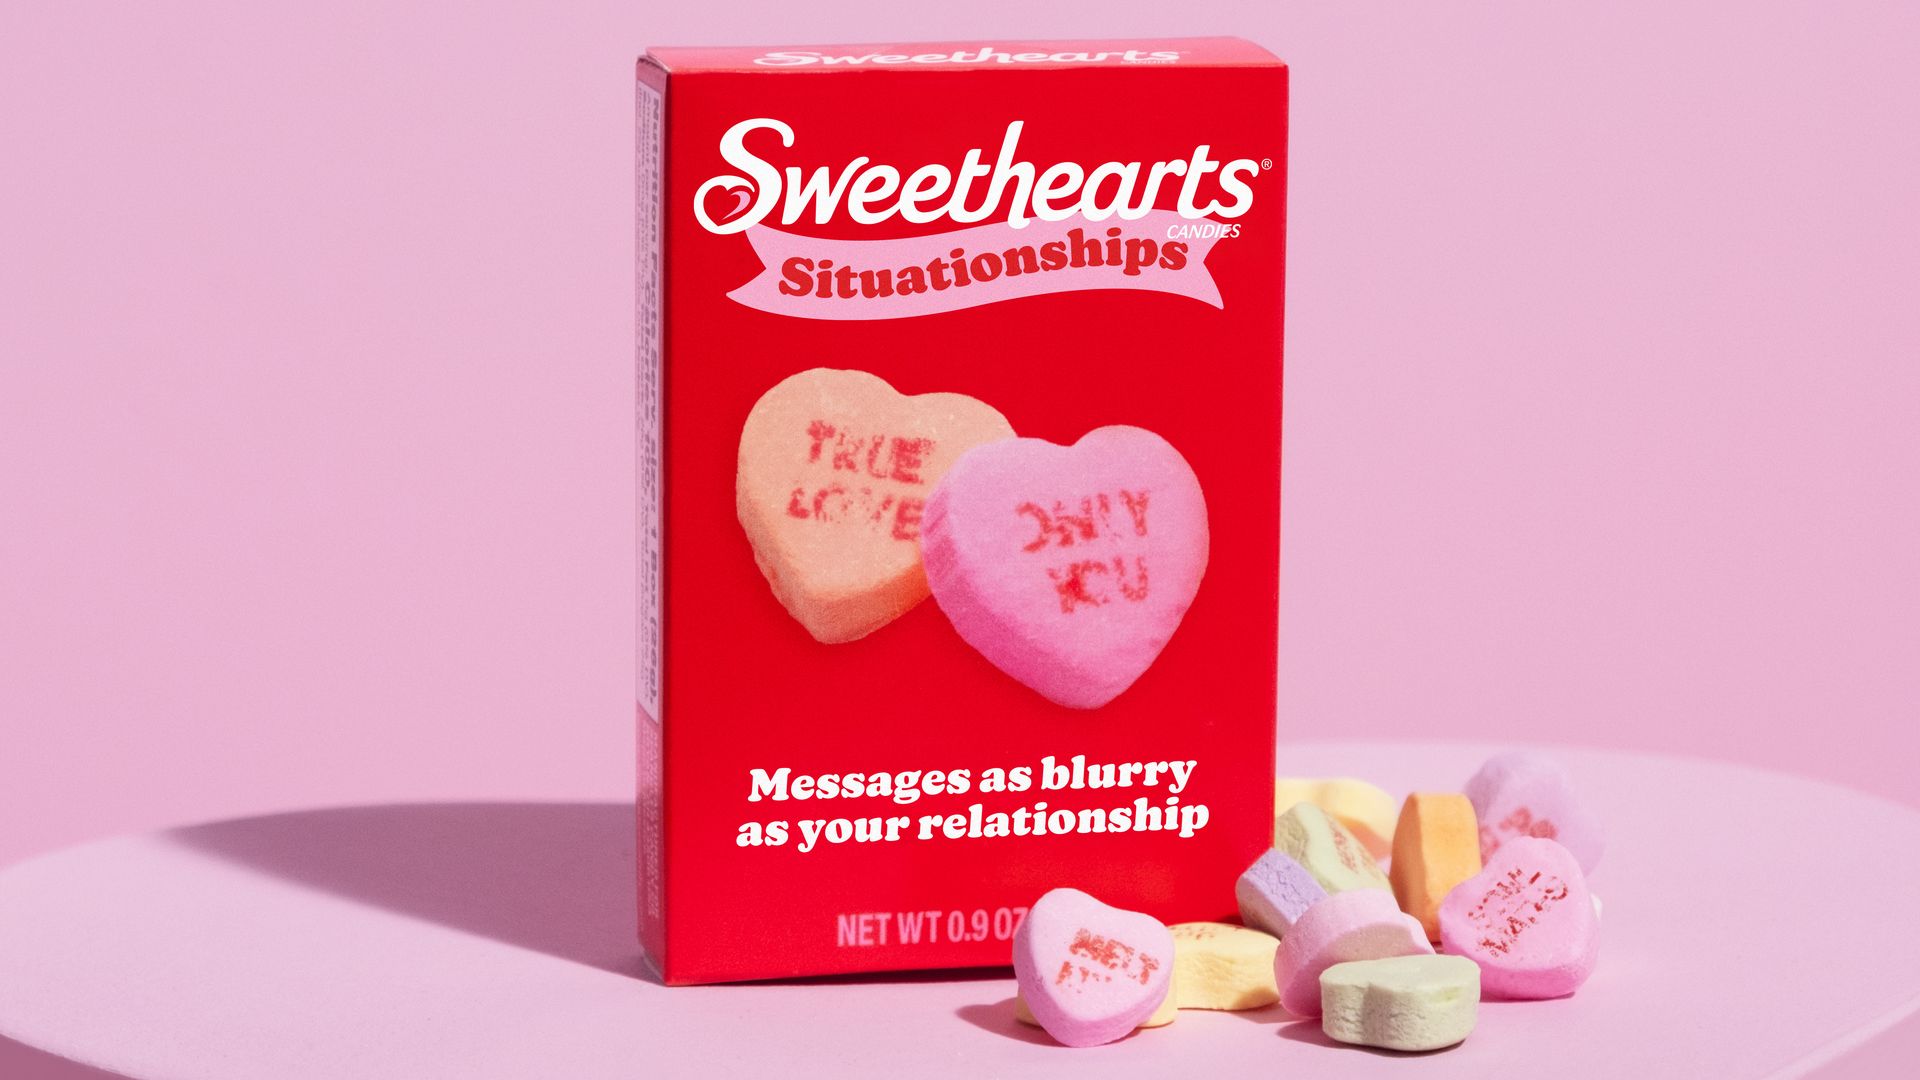 A box of candy hearts with the word "Sweethearts Situationships" on it.